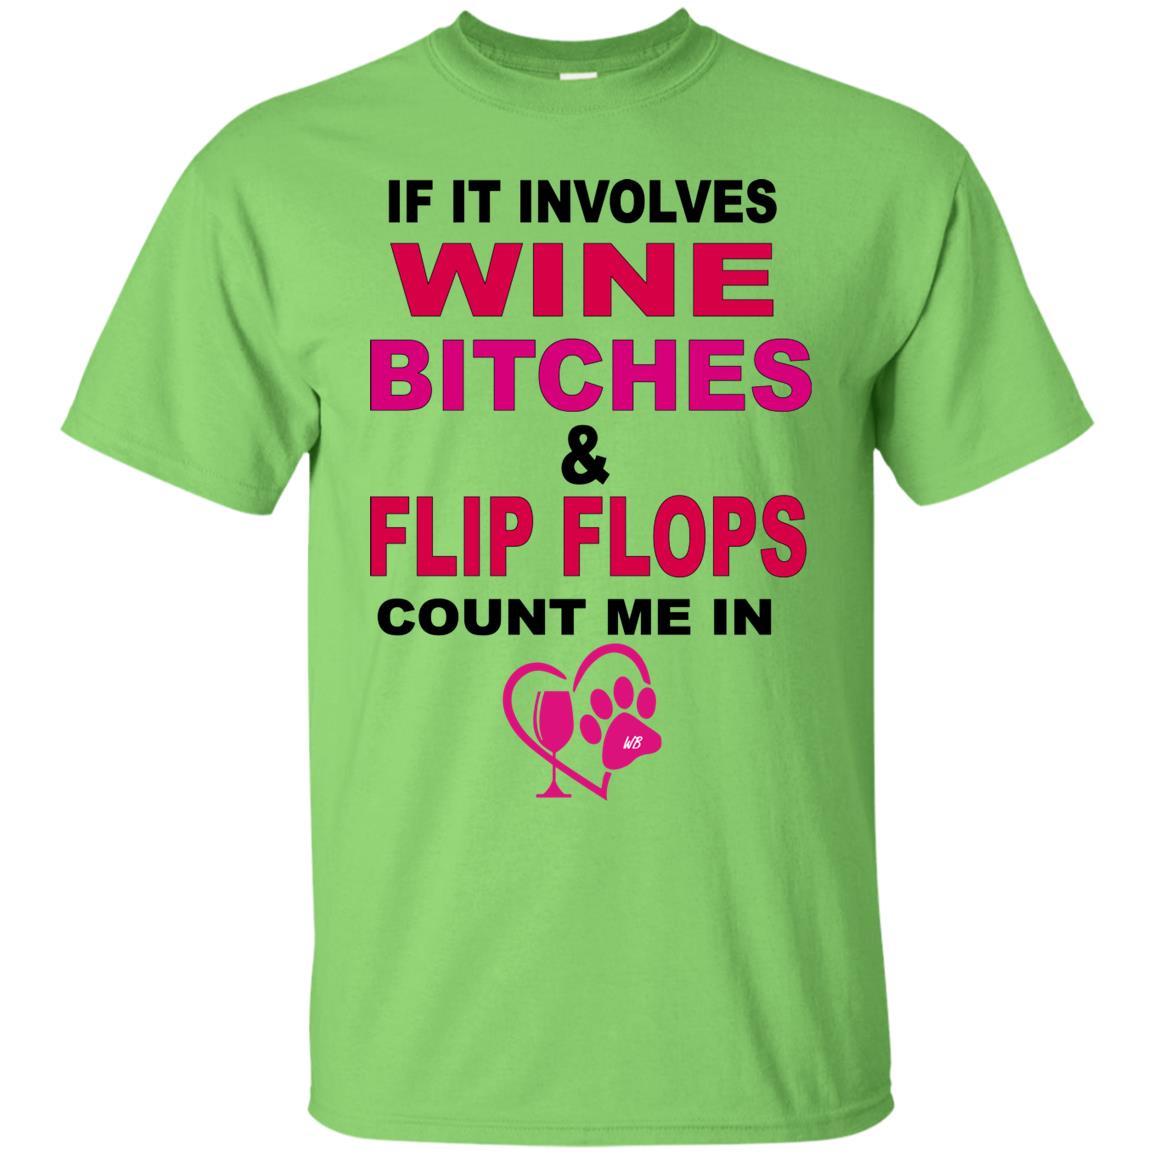 T-Shirts Lime / S WineyBitches.co " If It Involves Wine Bitches & Flip Flops I'm In" Ultra Cotton Unisex T-Shirt WineyBitches.co Hilariously Funny T-Shirt for Wine & Dog Lovers   WineyBitchesCo